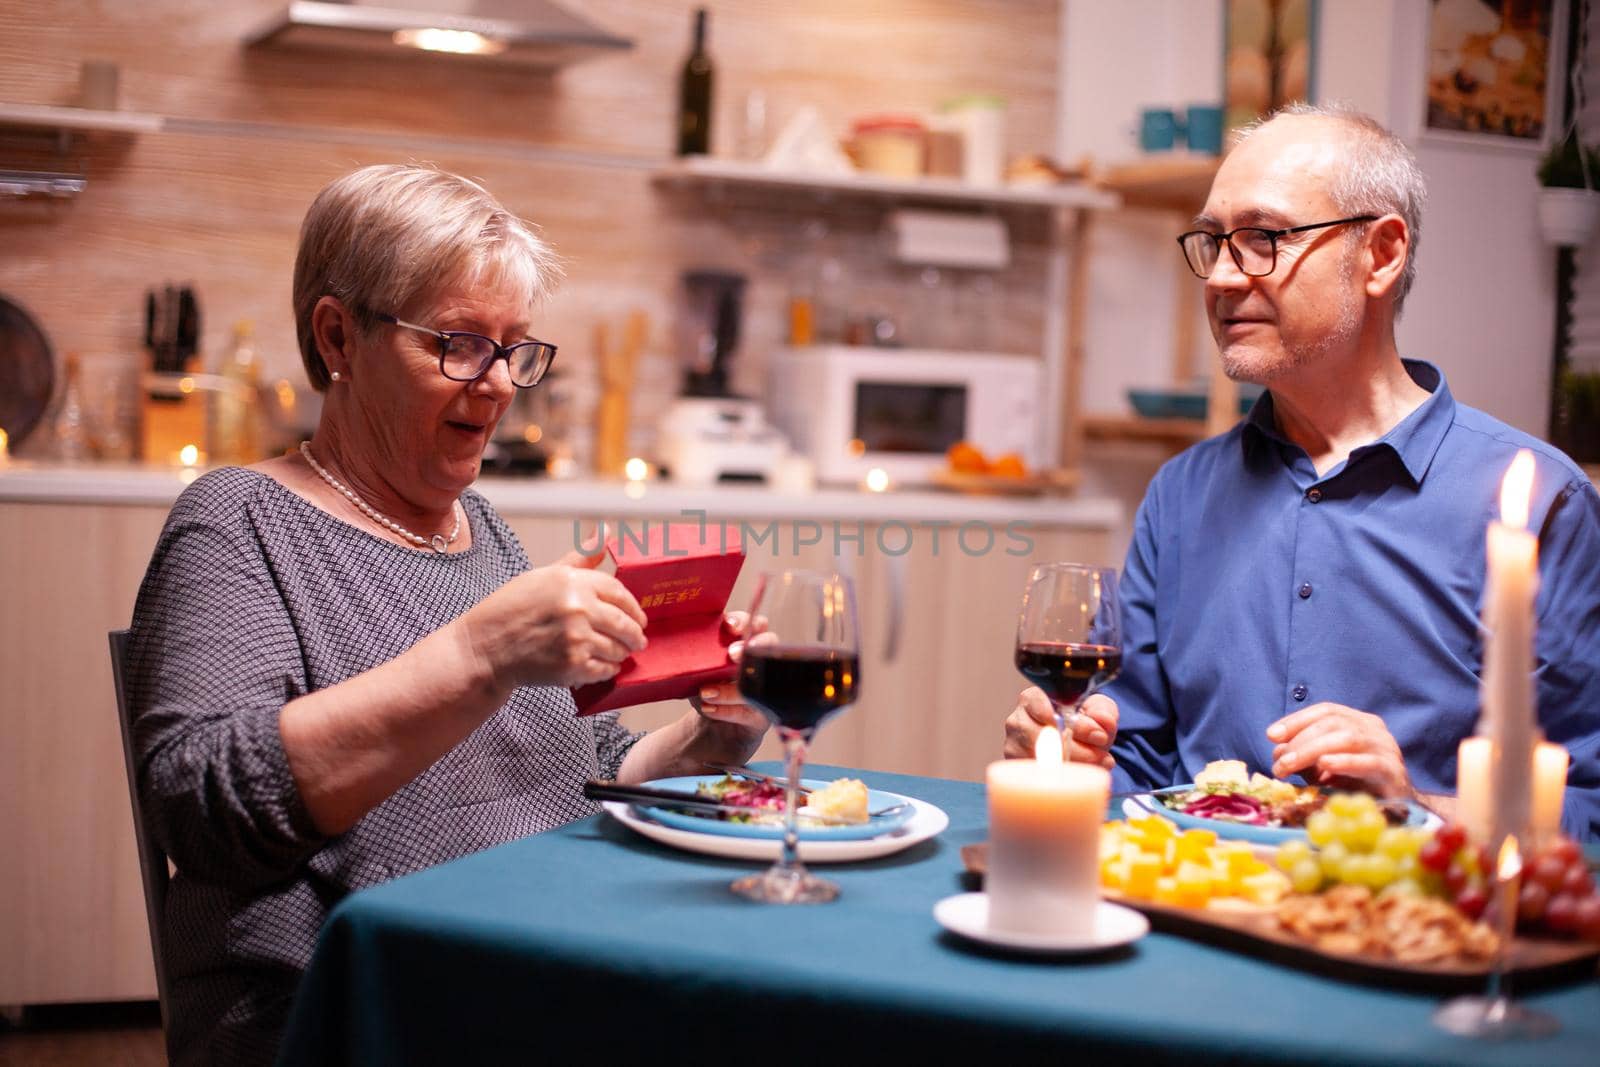 Senior woman looking surprised at gift box from husband during dinner in kitchen. Happy cheerful elderly couple dining together at home, enjoying the meal, celebrating their marriage , surprise holiday.